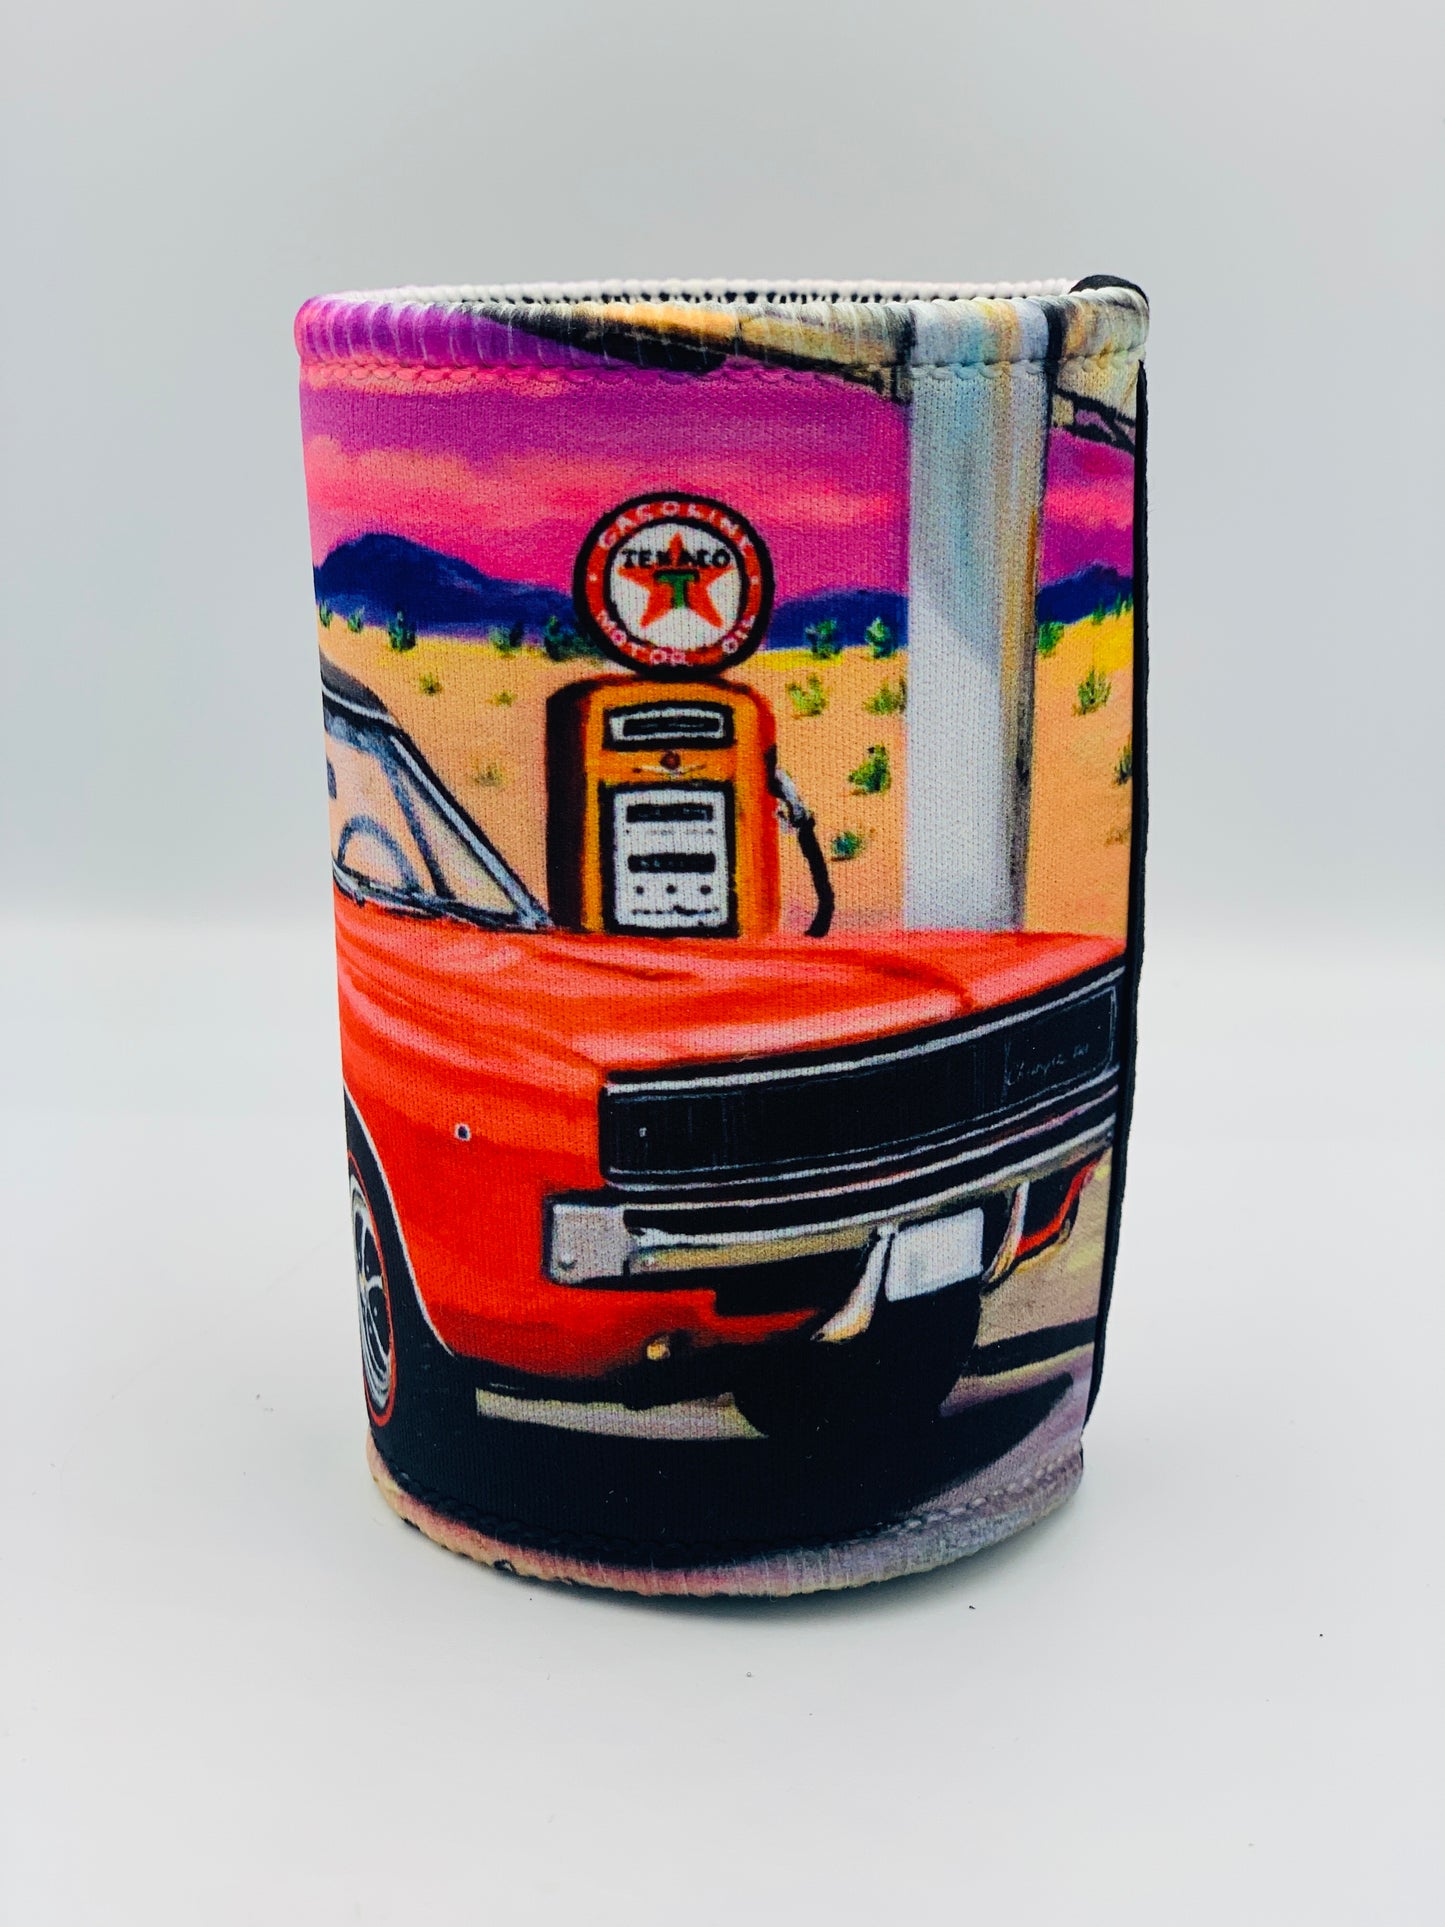 Dodge Charger Classic Car Stubby Holder